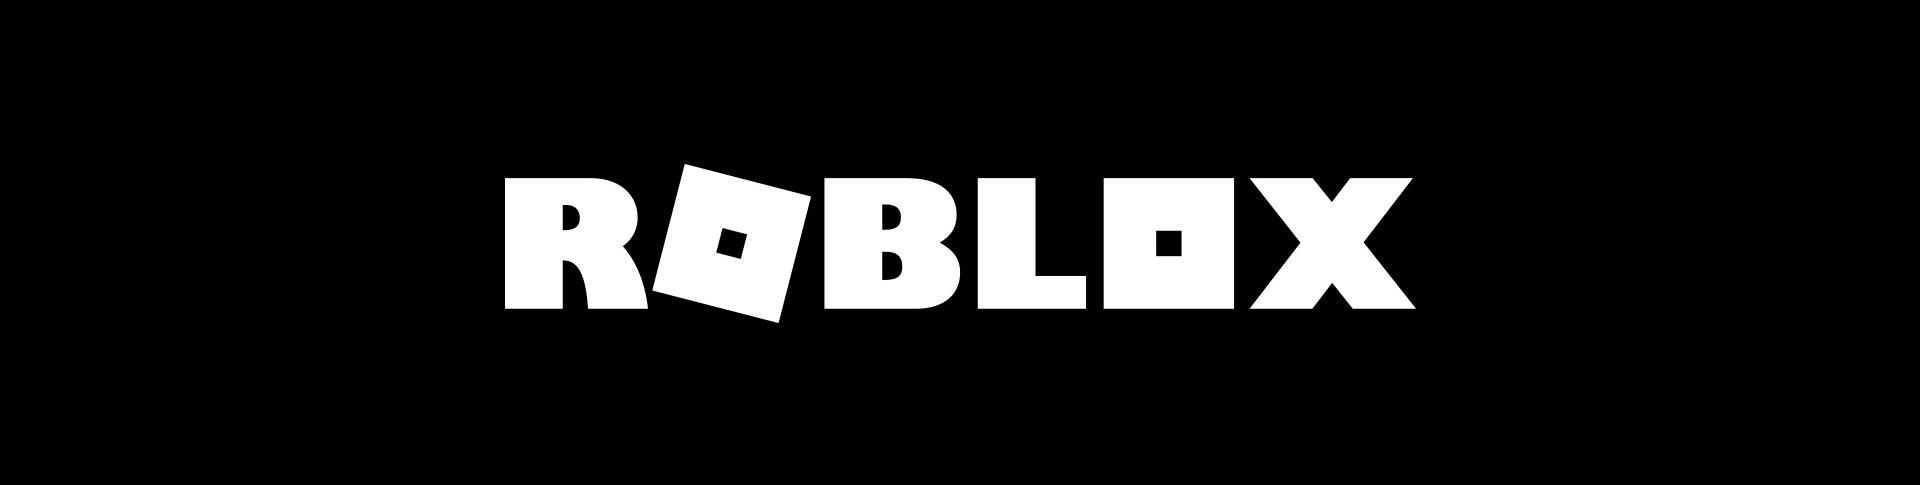 A Complete History Of The Roblox Logo Pocket Tactics - all official roblox logos 2006 2004 2017 new youtube